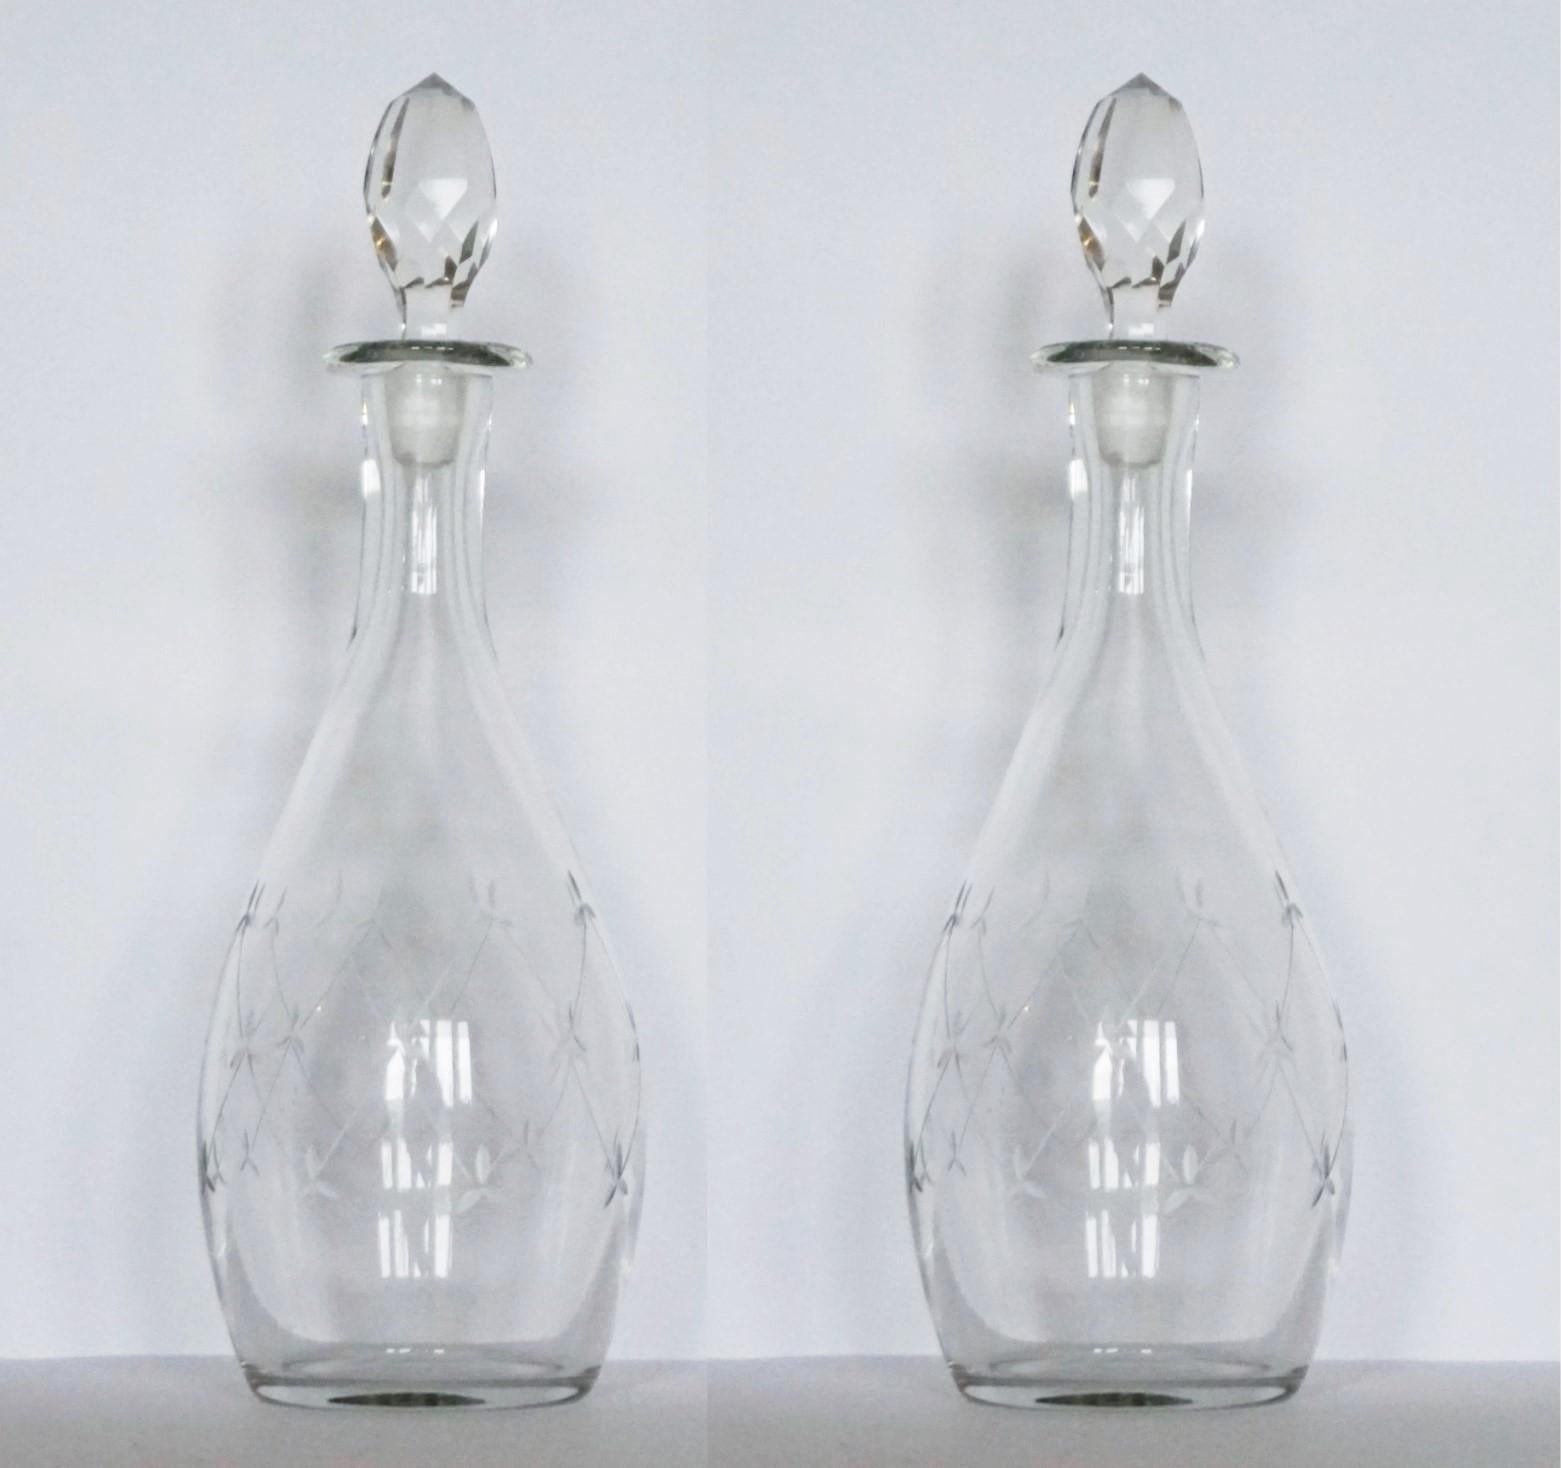 A fine pair of Victorian clear crystal tapered decanters or carafes finely hand-engraved with elegant motivs, with its original hand-faceted rock crystal tall stoppers, England, circa 1860-1870. Both decanters in very good condition, no chips or